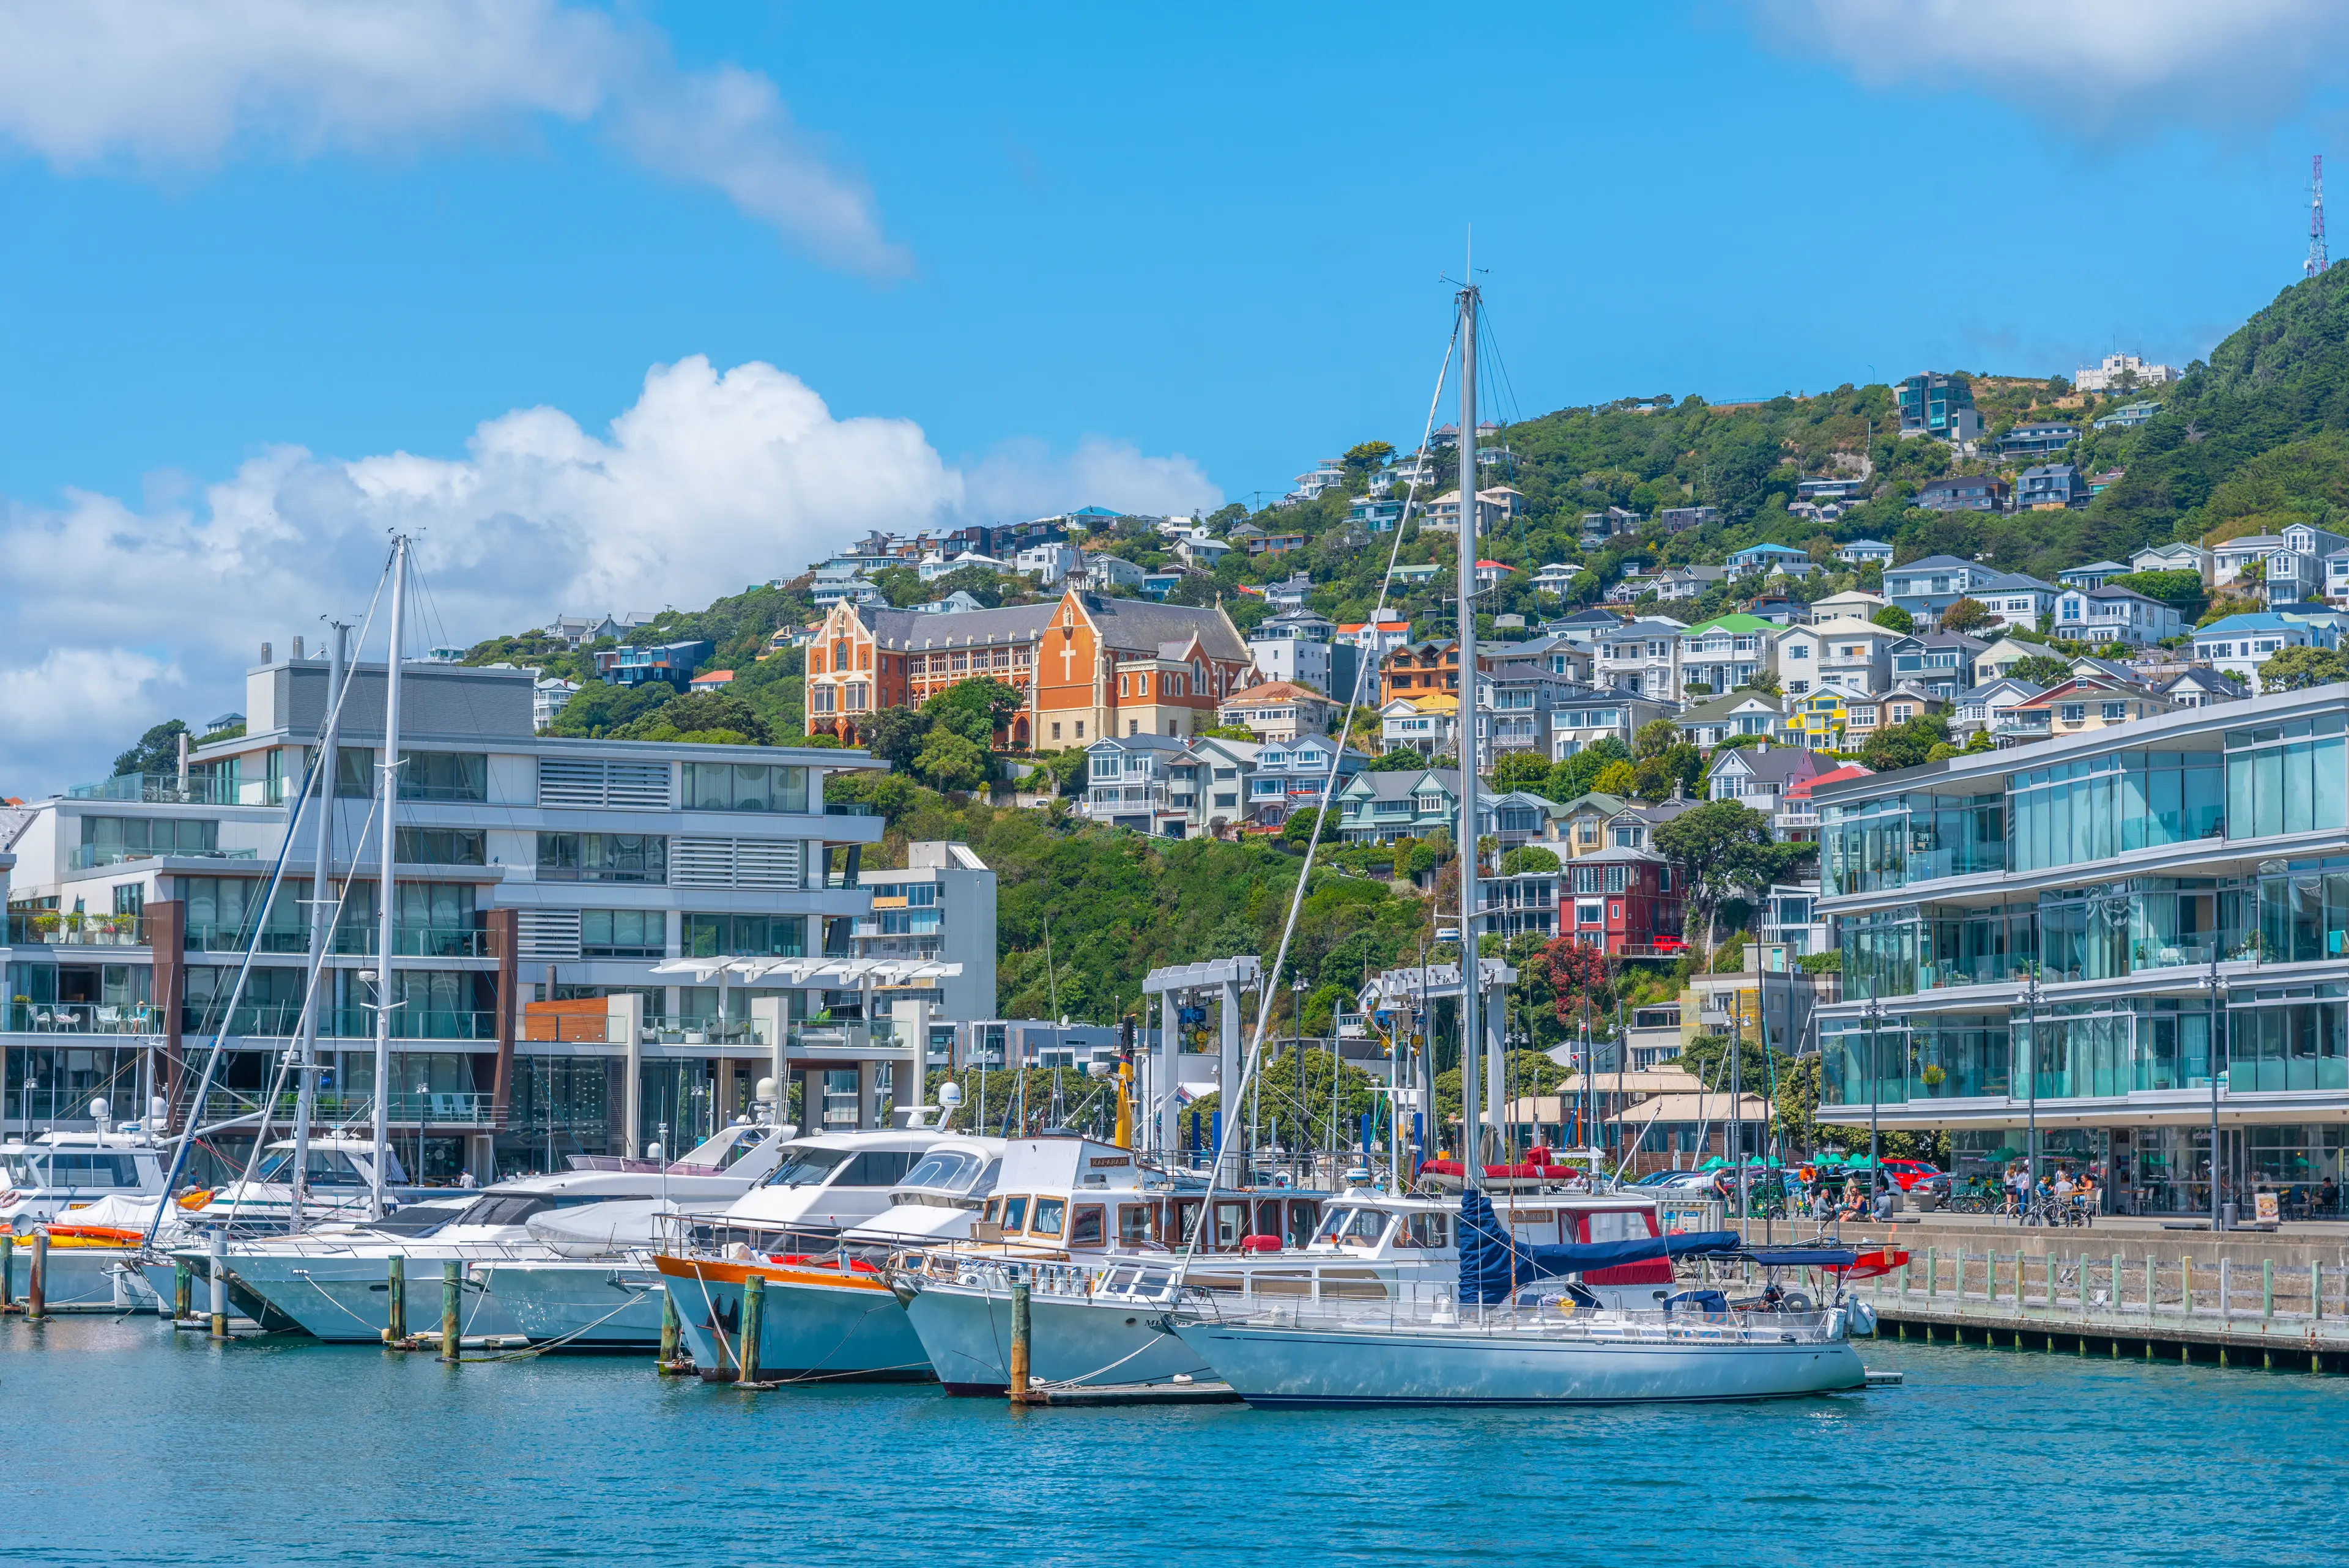 2-Day Exciting Adventure Itinerary in Wellington, New Zealand